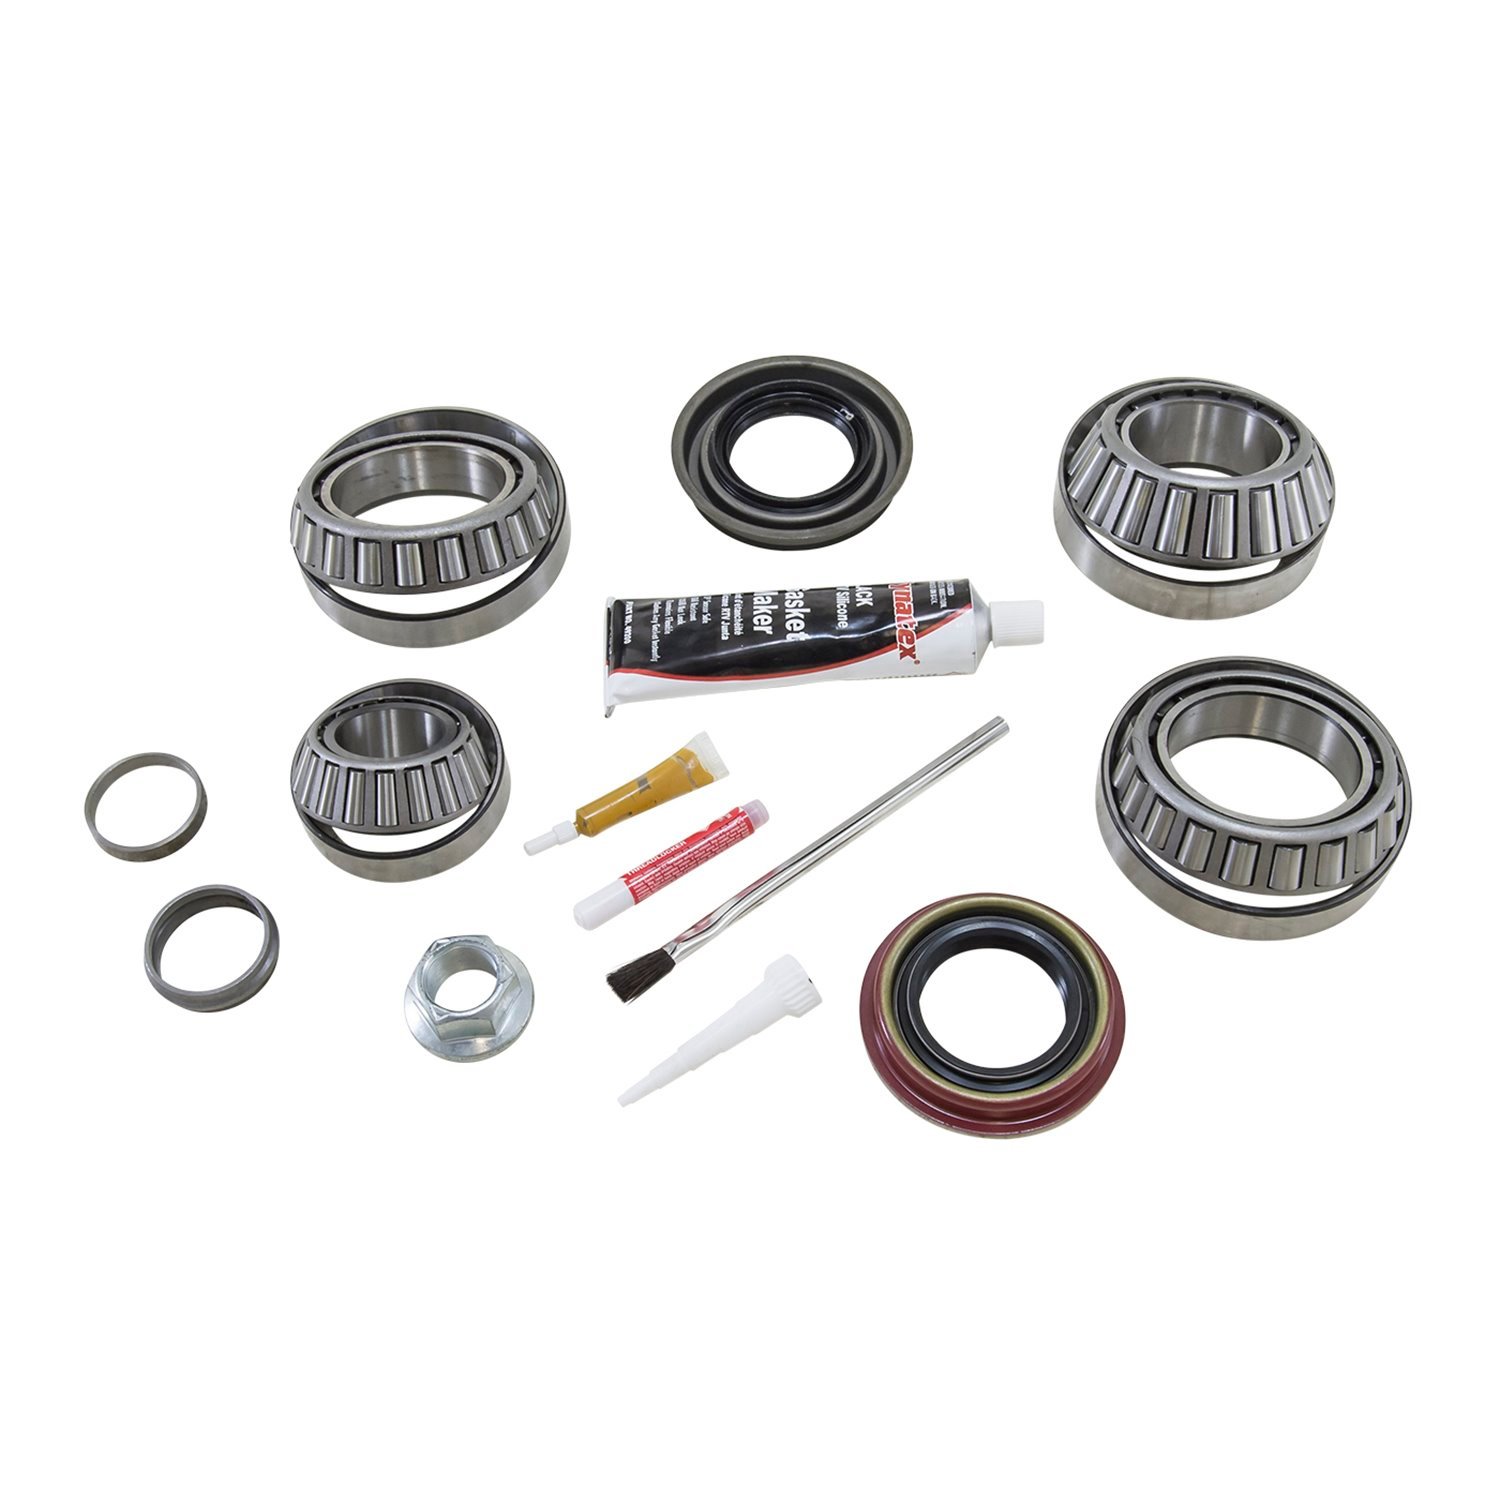 Bearing Install Kit For '08-'10 Ford 9.75 in. Diff W/ '11-Up Ring & Pinion